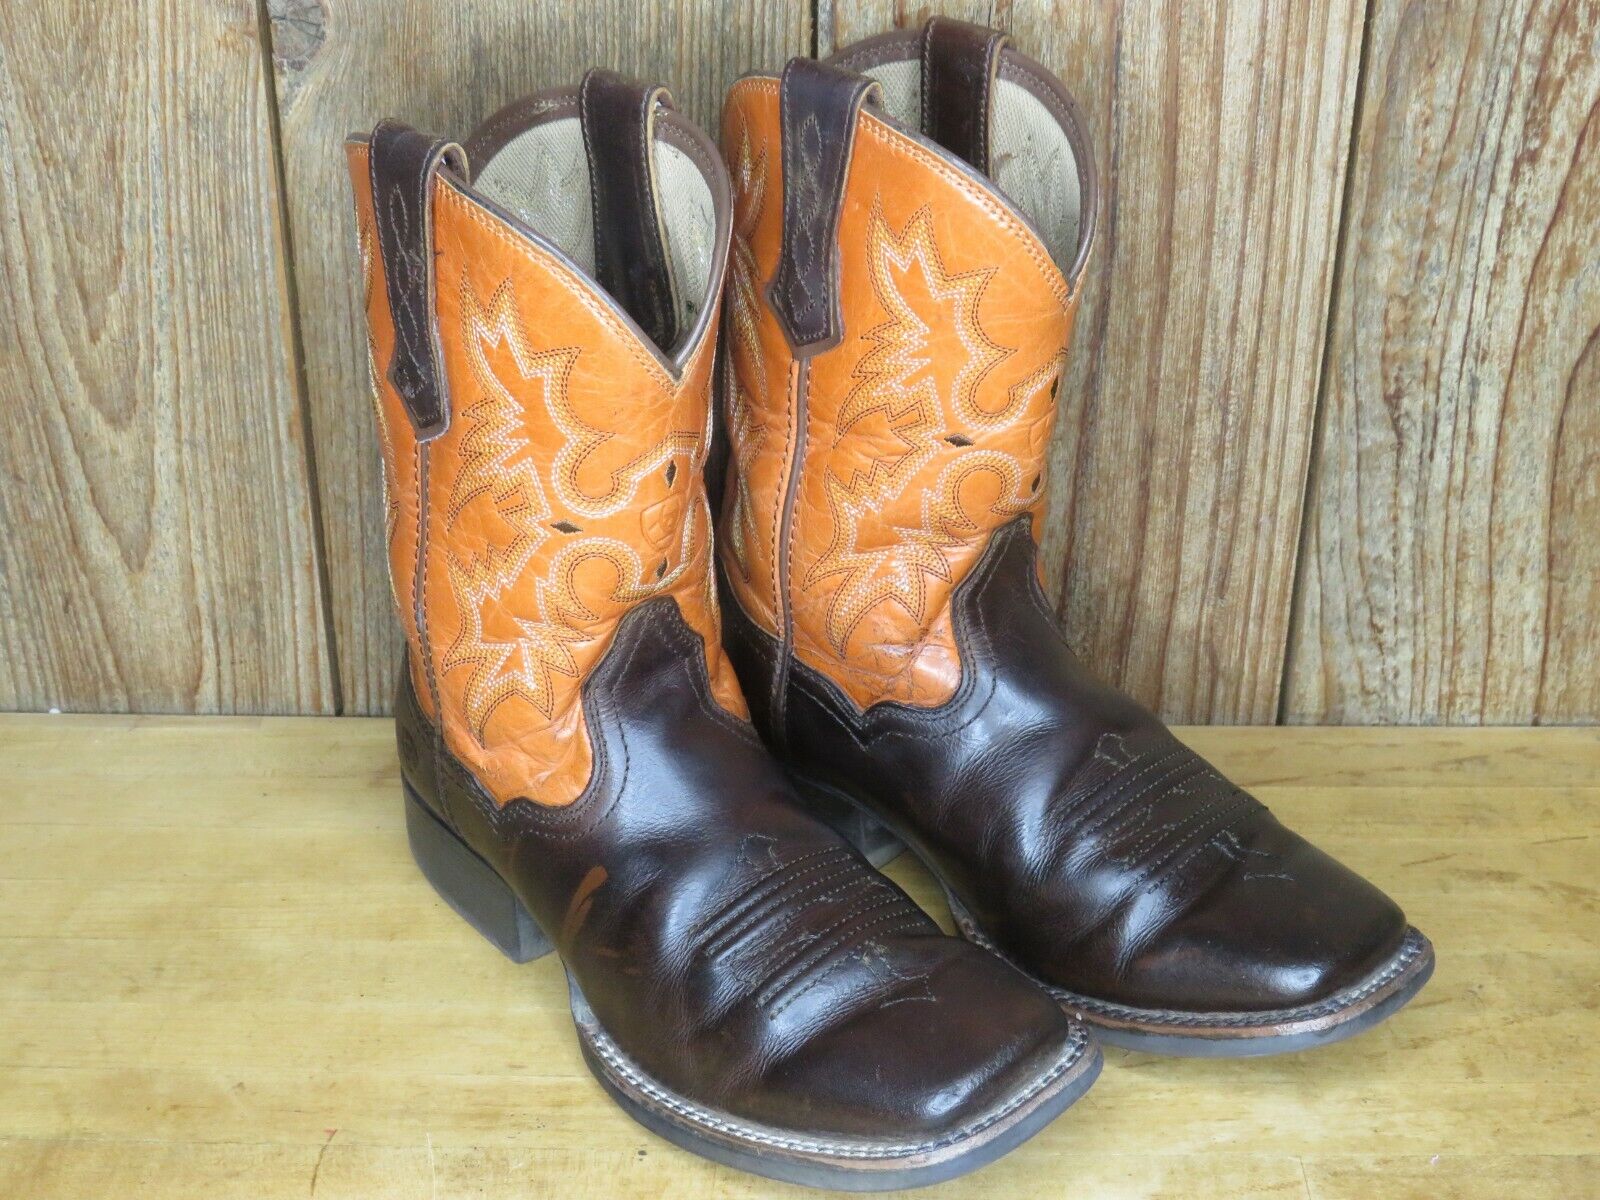 Kids Size 2 Ariat Tombstone Cowboy Boots Square Toe Orange/brown 10016227